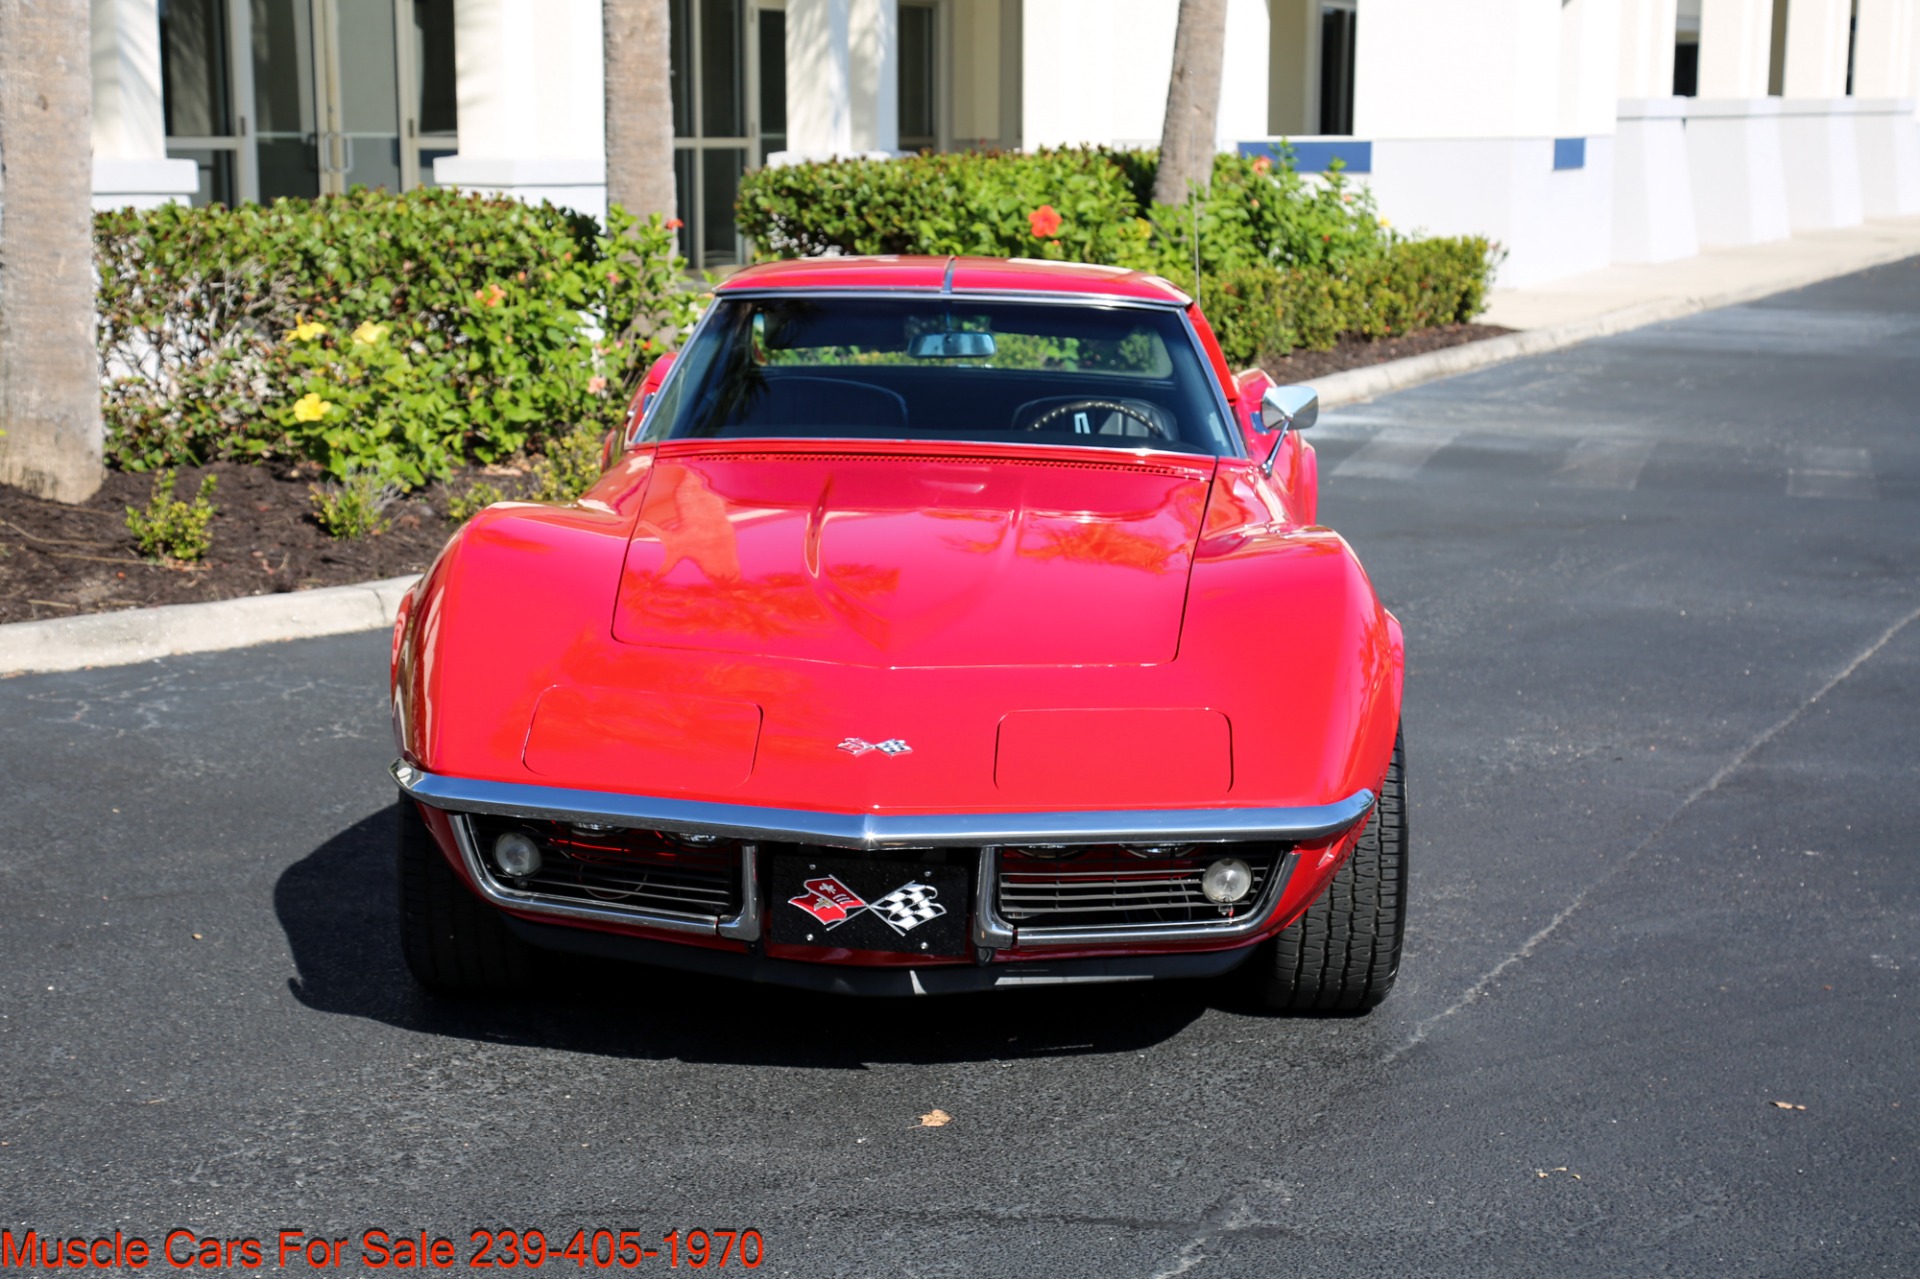 Used 1968 Chevrolet Corvette Stingray for sale $34,500 at Muscle Cars for Sale Inc. in Fort Myers FL 33912 7